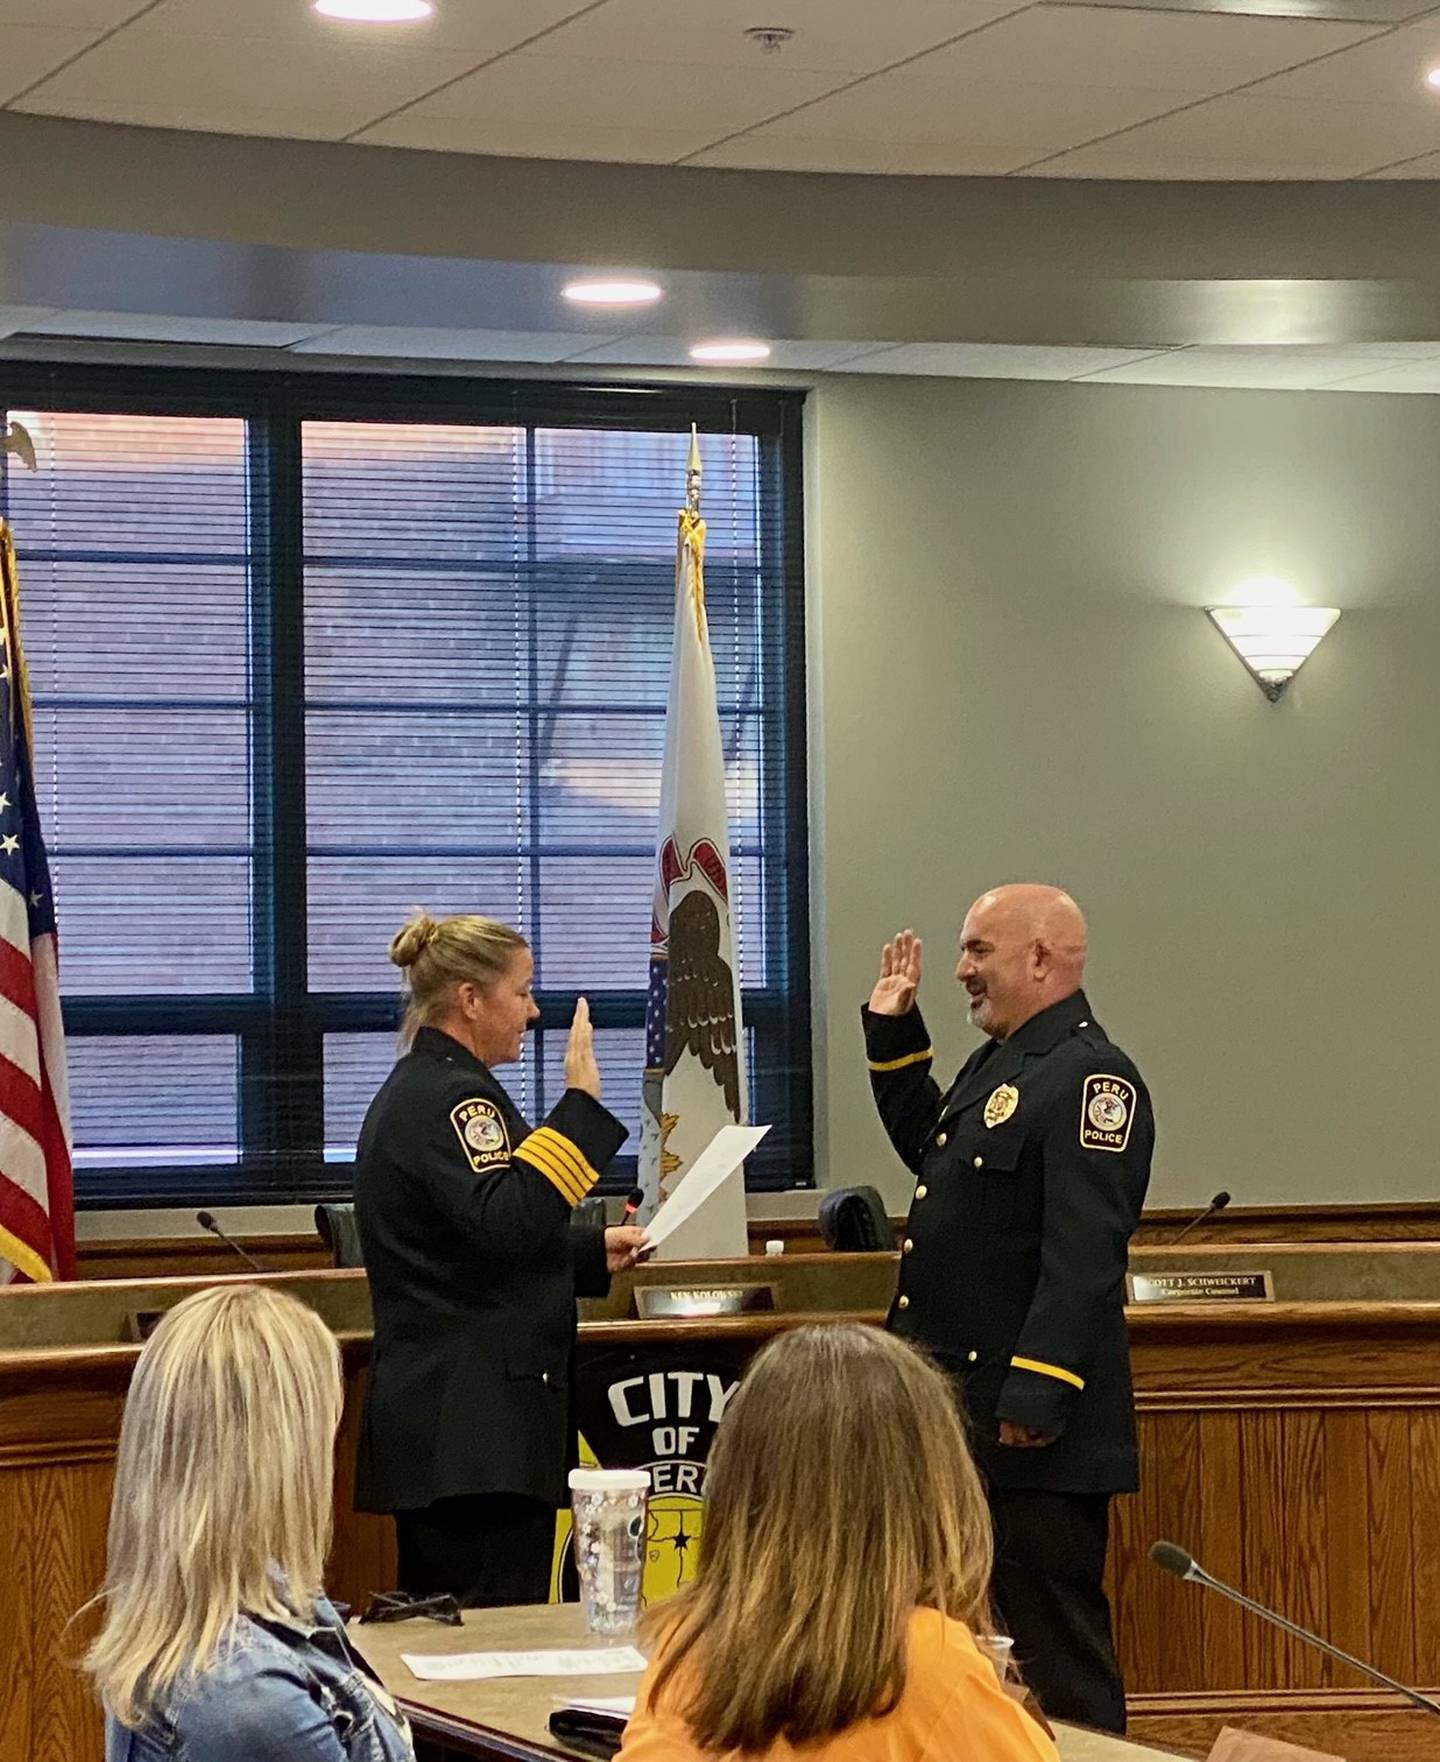 Peru Police Chief Sarah Raymond reads the oath to Officer Brad Jones promoting him Sergeant during Monday nights city council meeting.